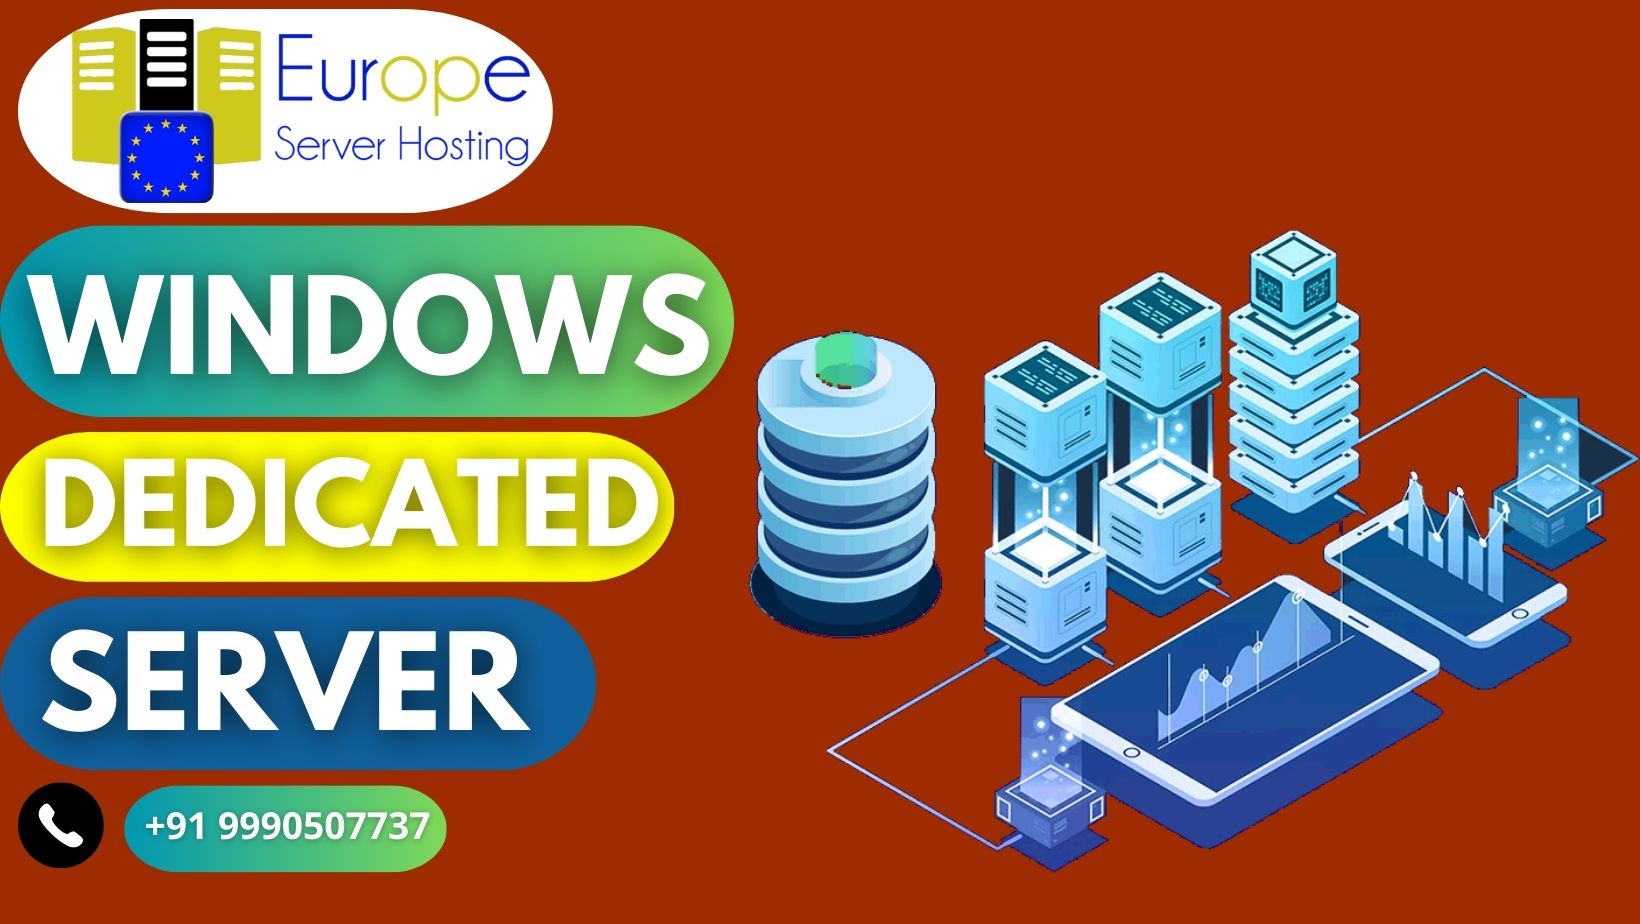 Choosing the Right Windows Dedicated Server for Your Business Needs